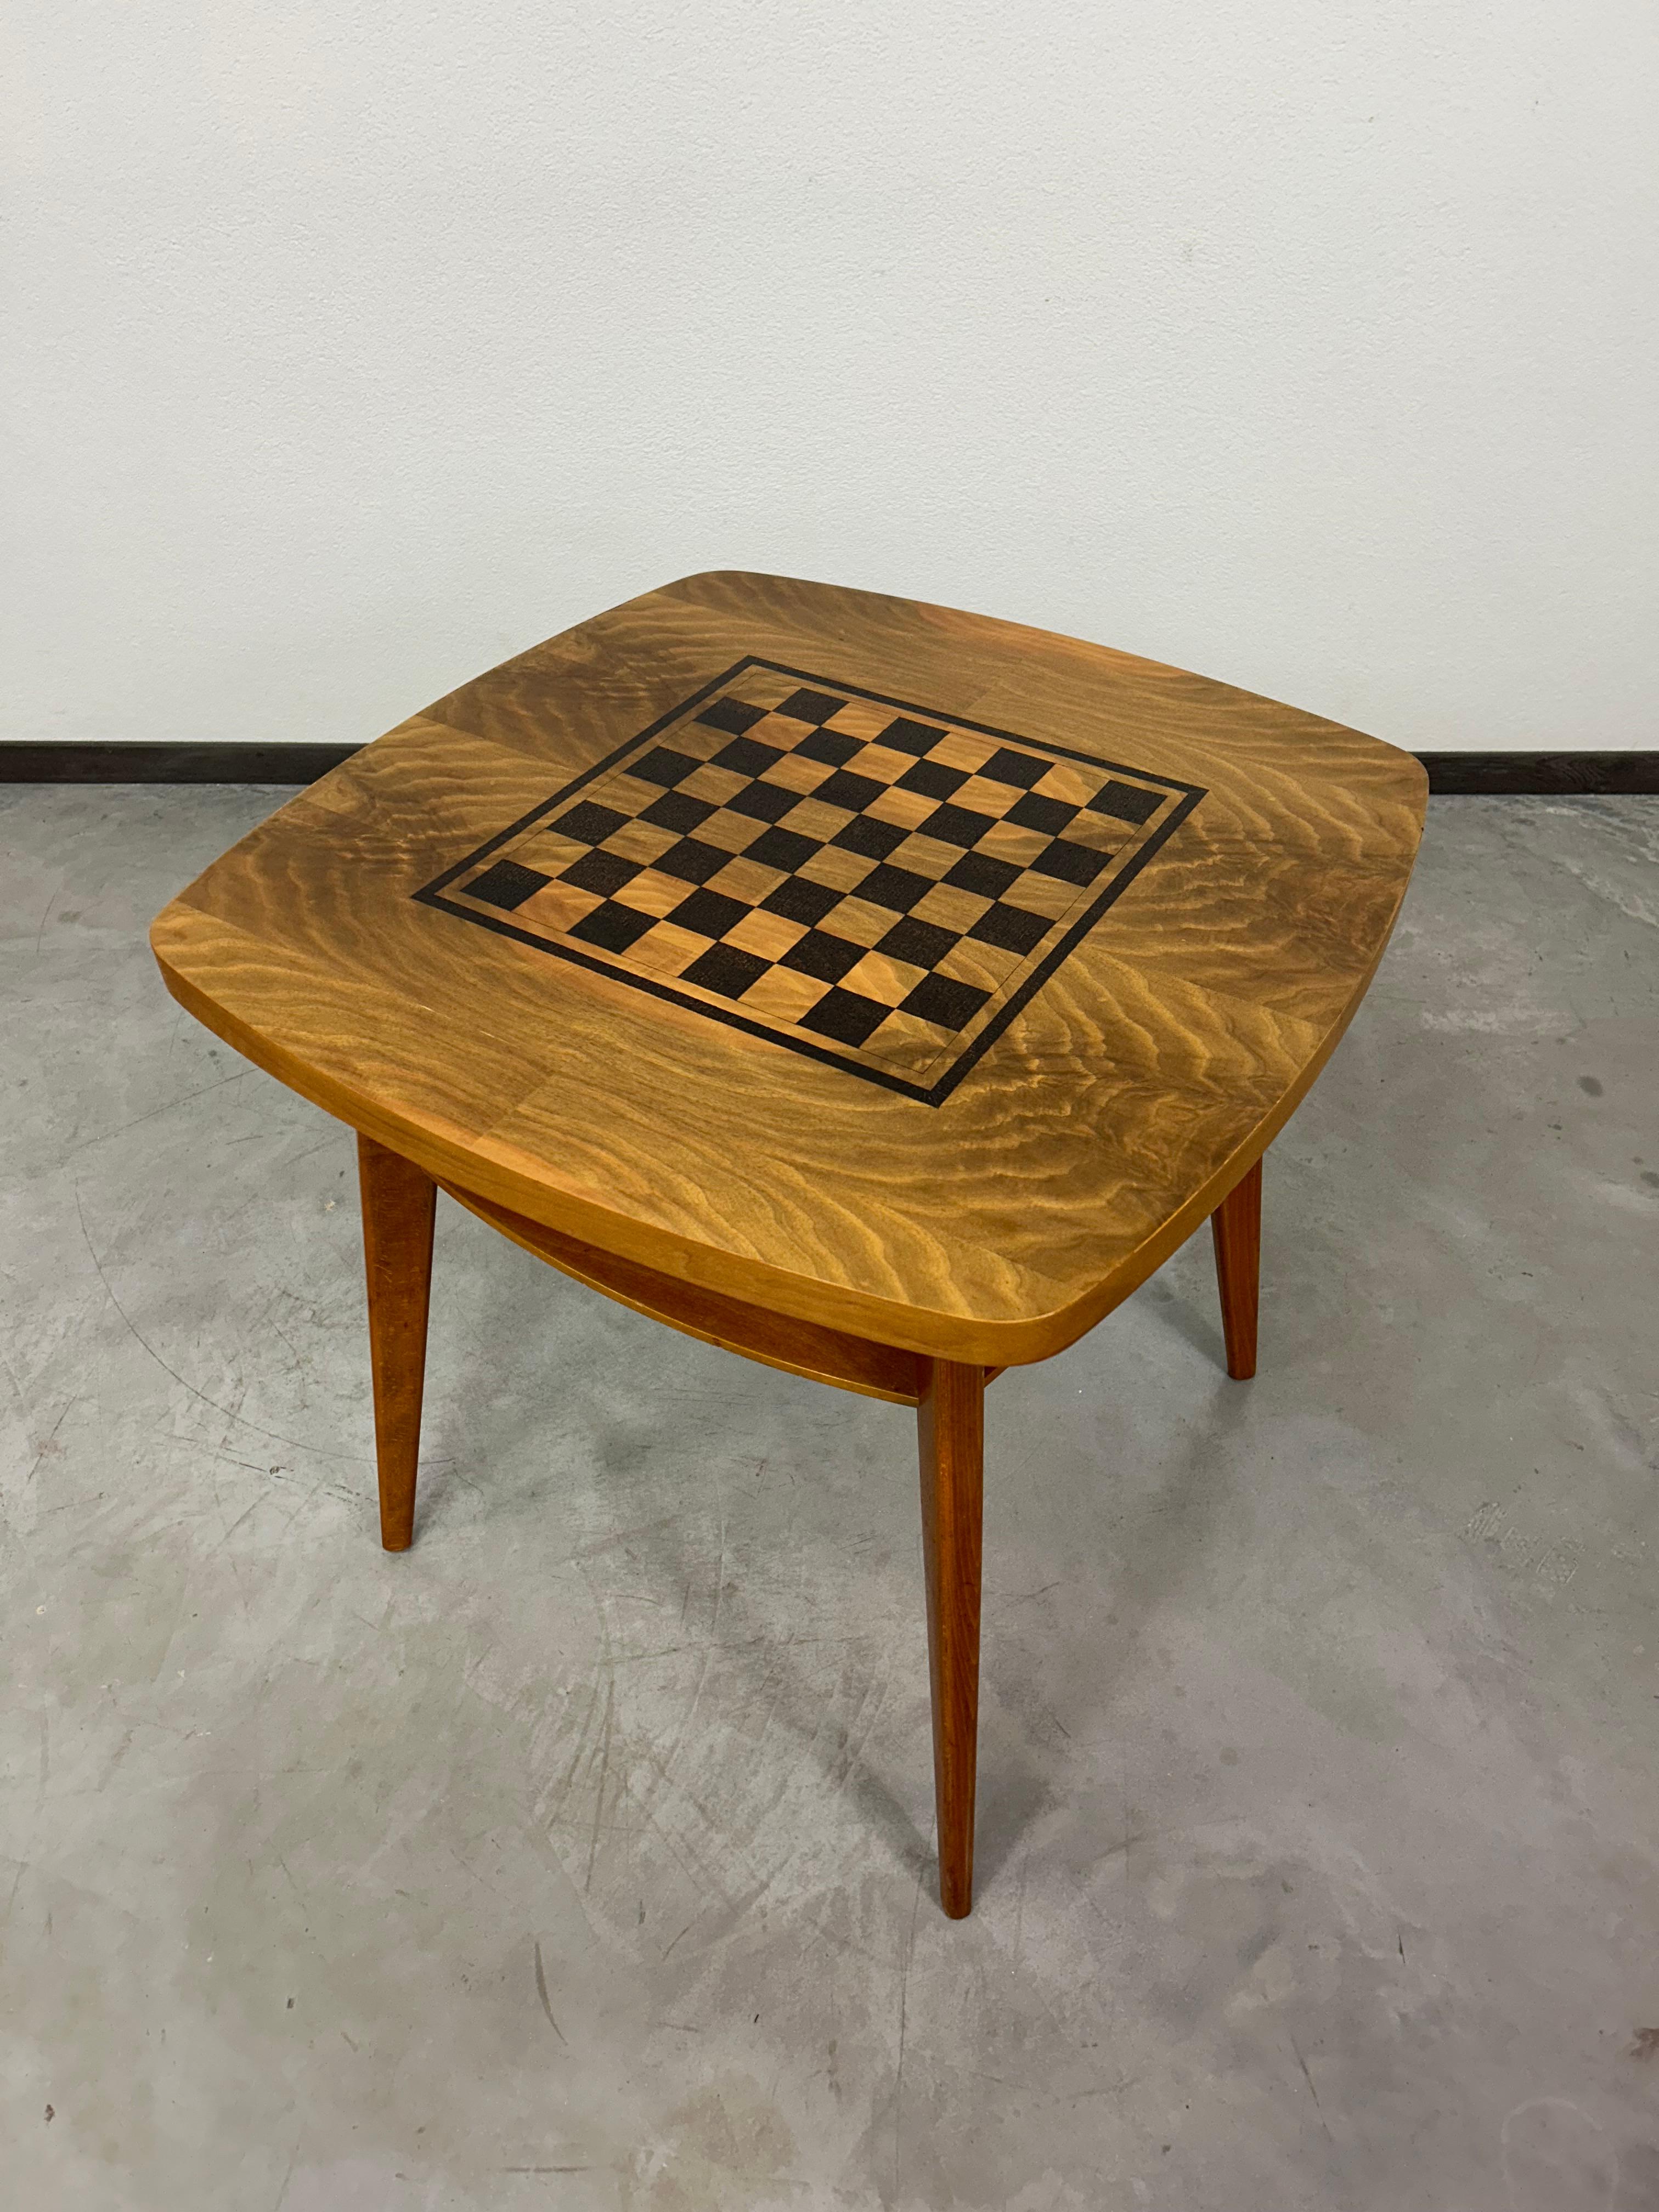 Slovak Vintage Hand Made Chess Table